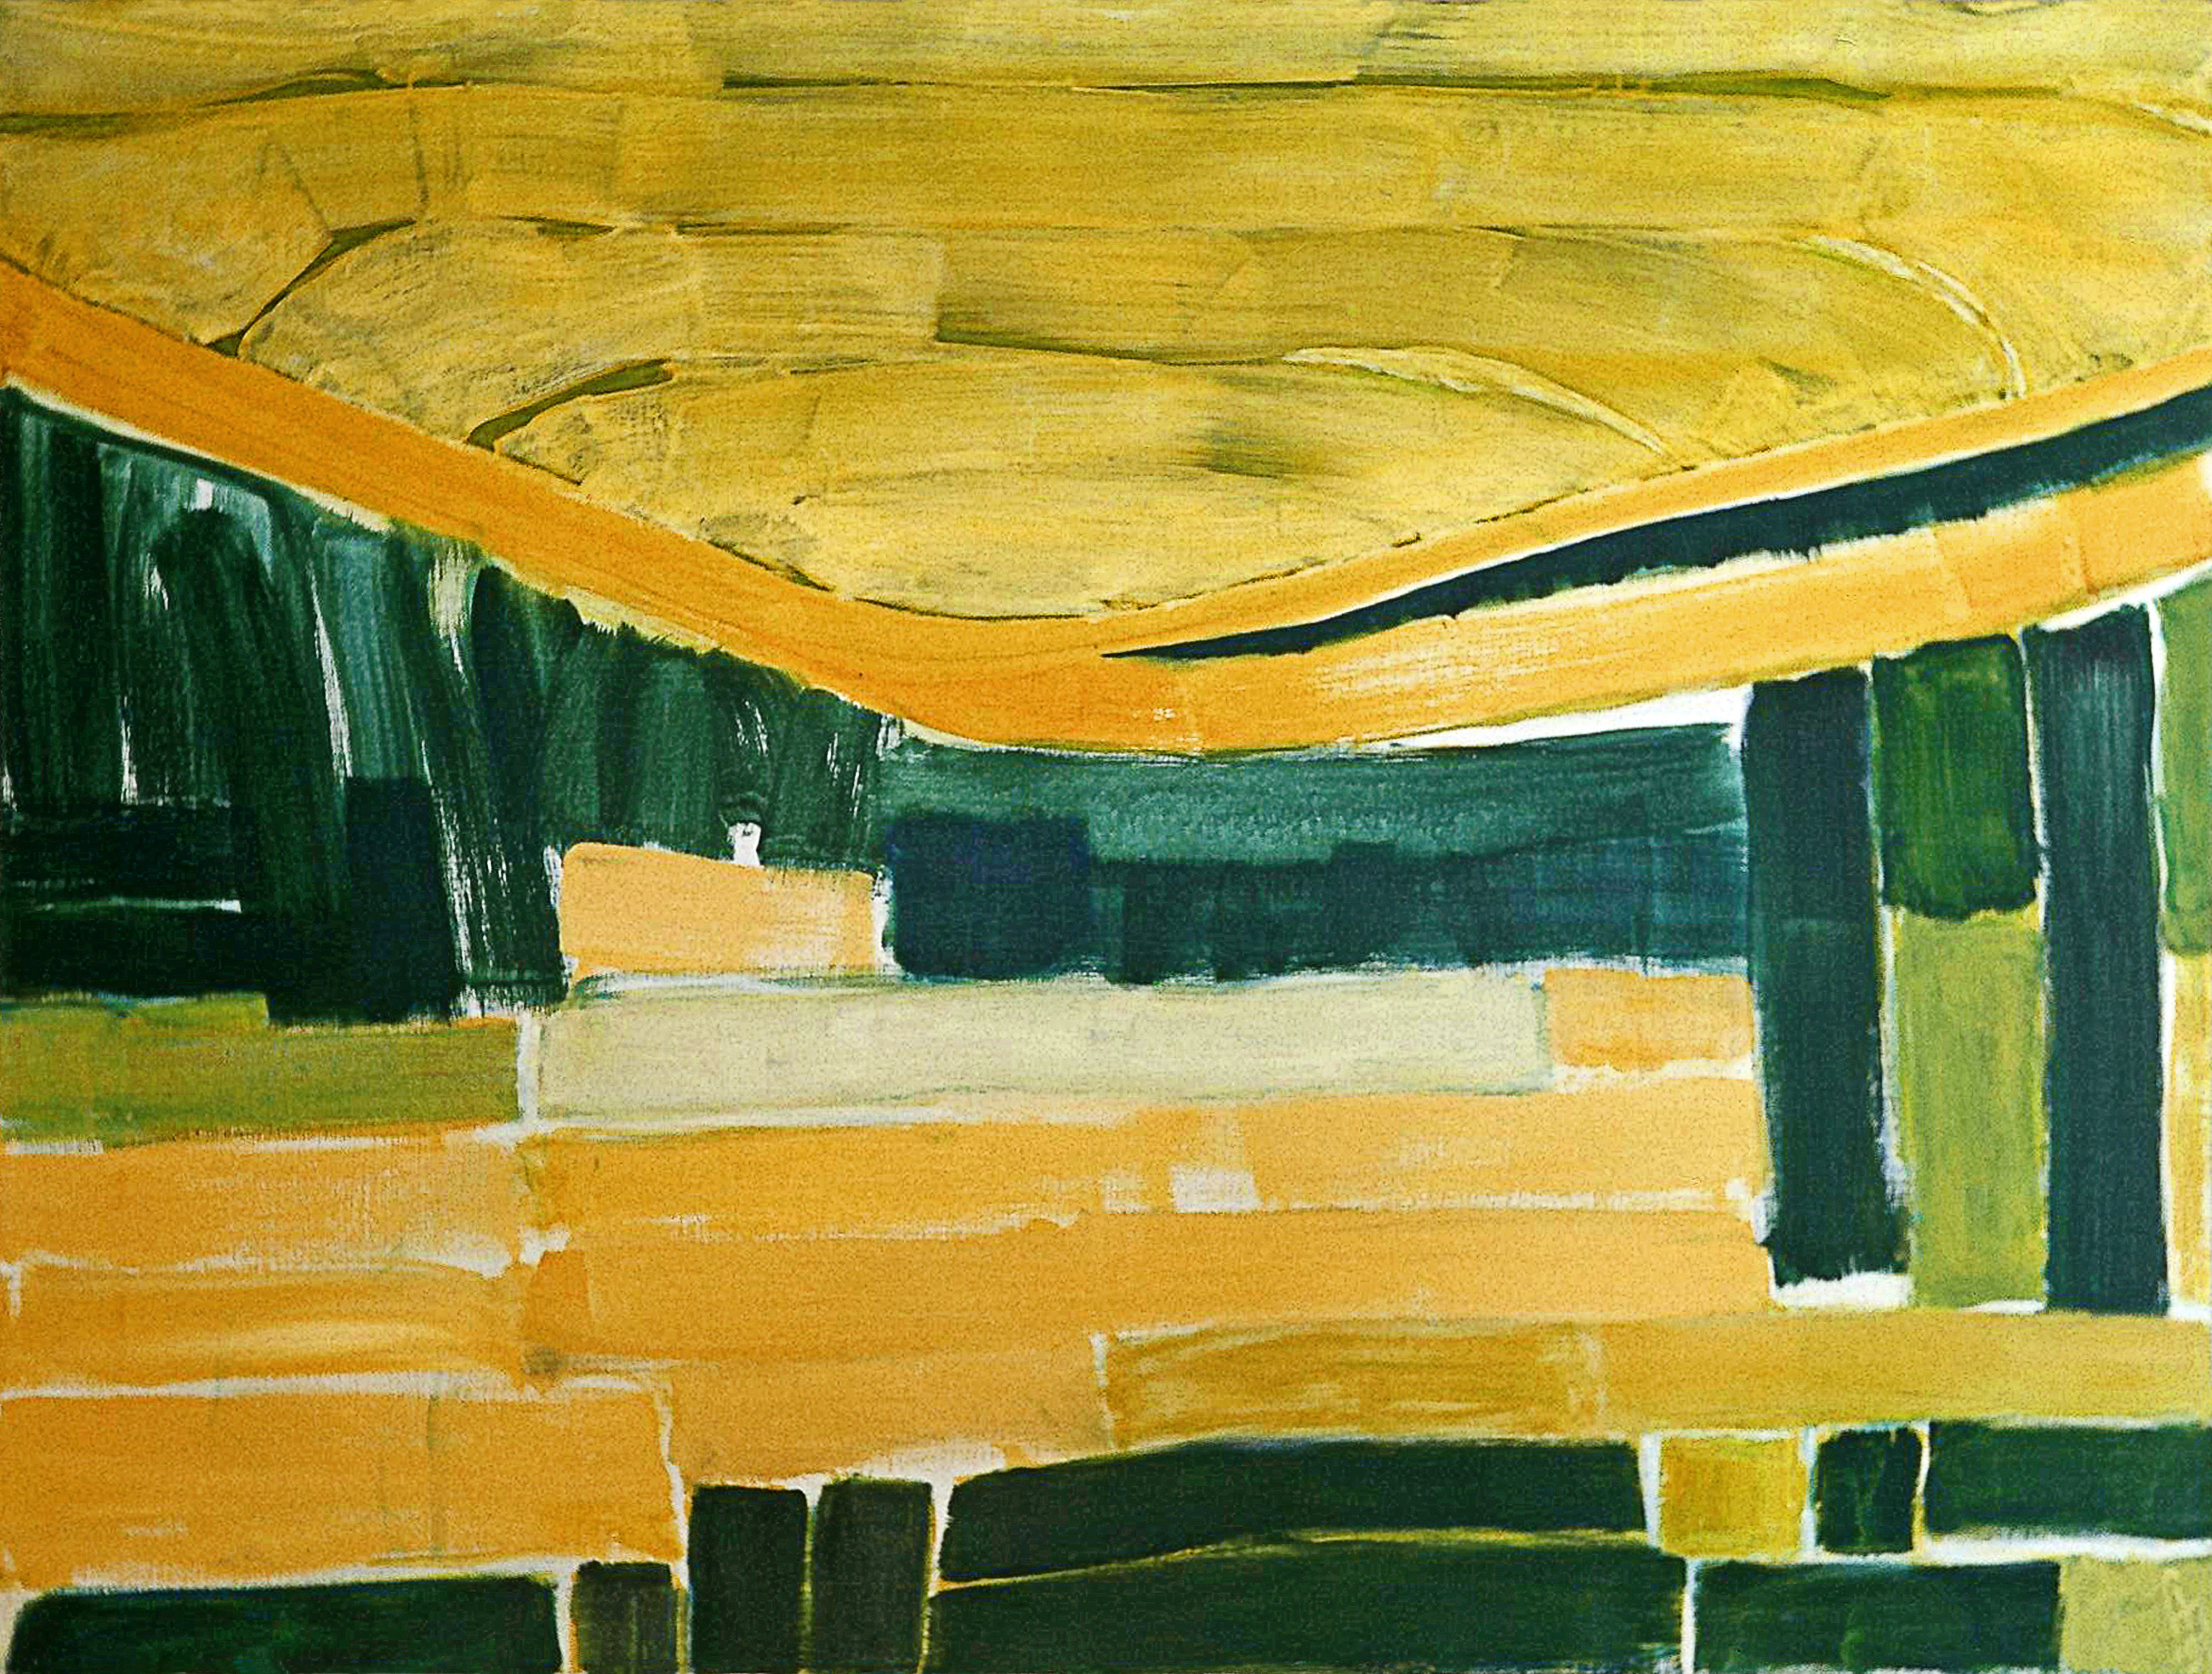 1990 - 'abstract landscape with sunlight', large abstract painting; artist fons heijnsbroek, the netherlands - a high resolution art image in free download to print, in public domain / commons, cc-by. photo